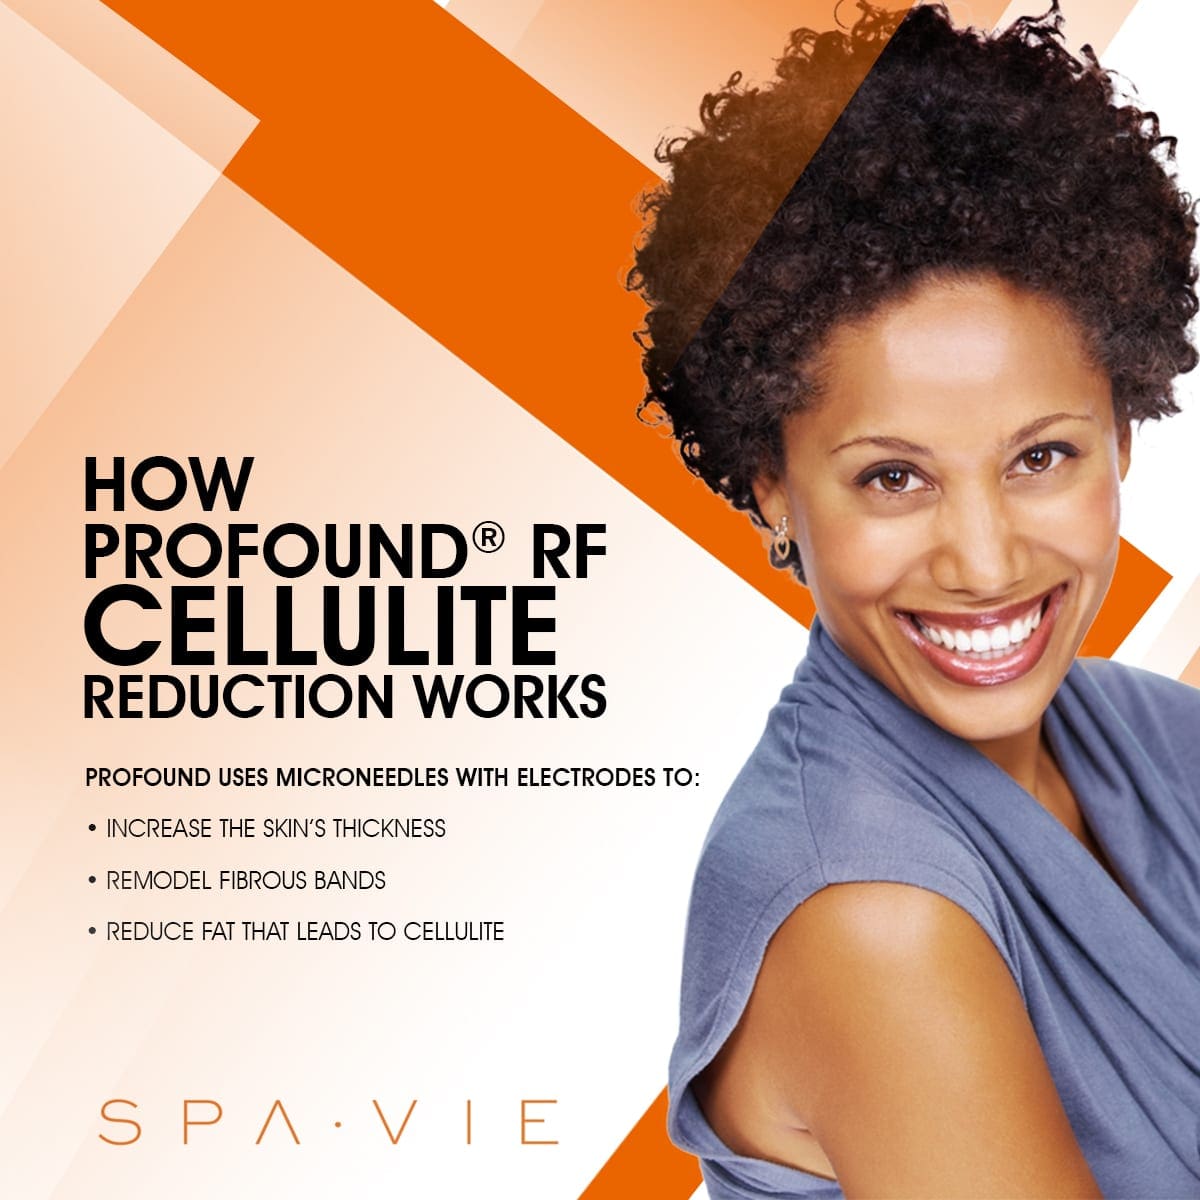 How Profound RF Cellulite Reduction Works infographic with woman smiling.